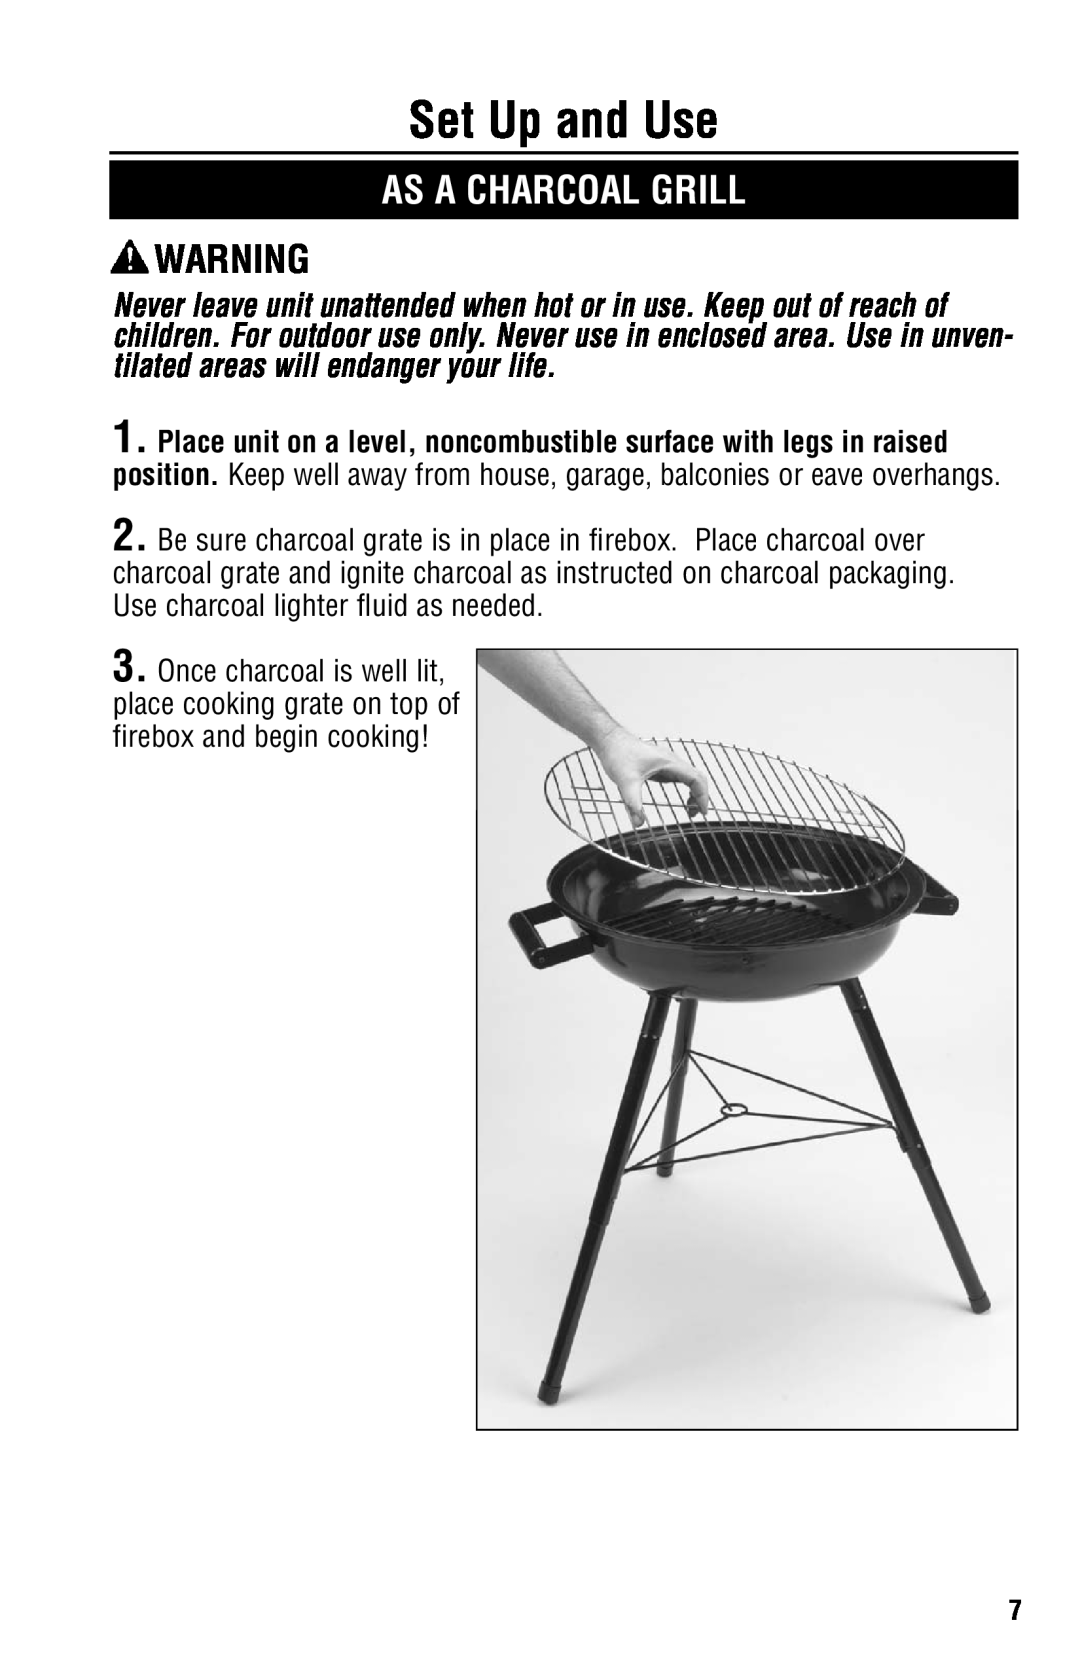 Coleman 5065-705 instruction manual As A Charcoal Grill, Set Up and Use 